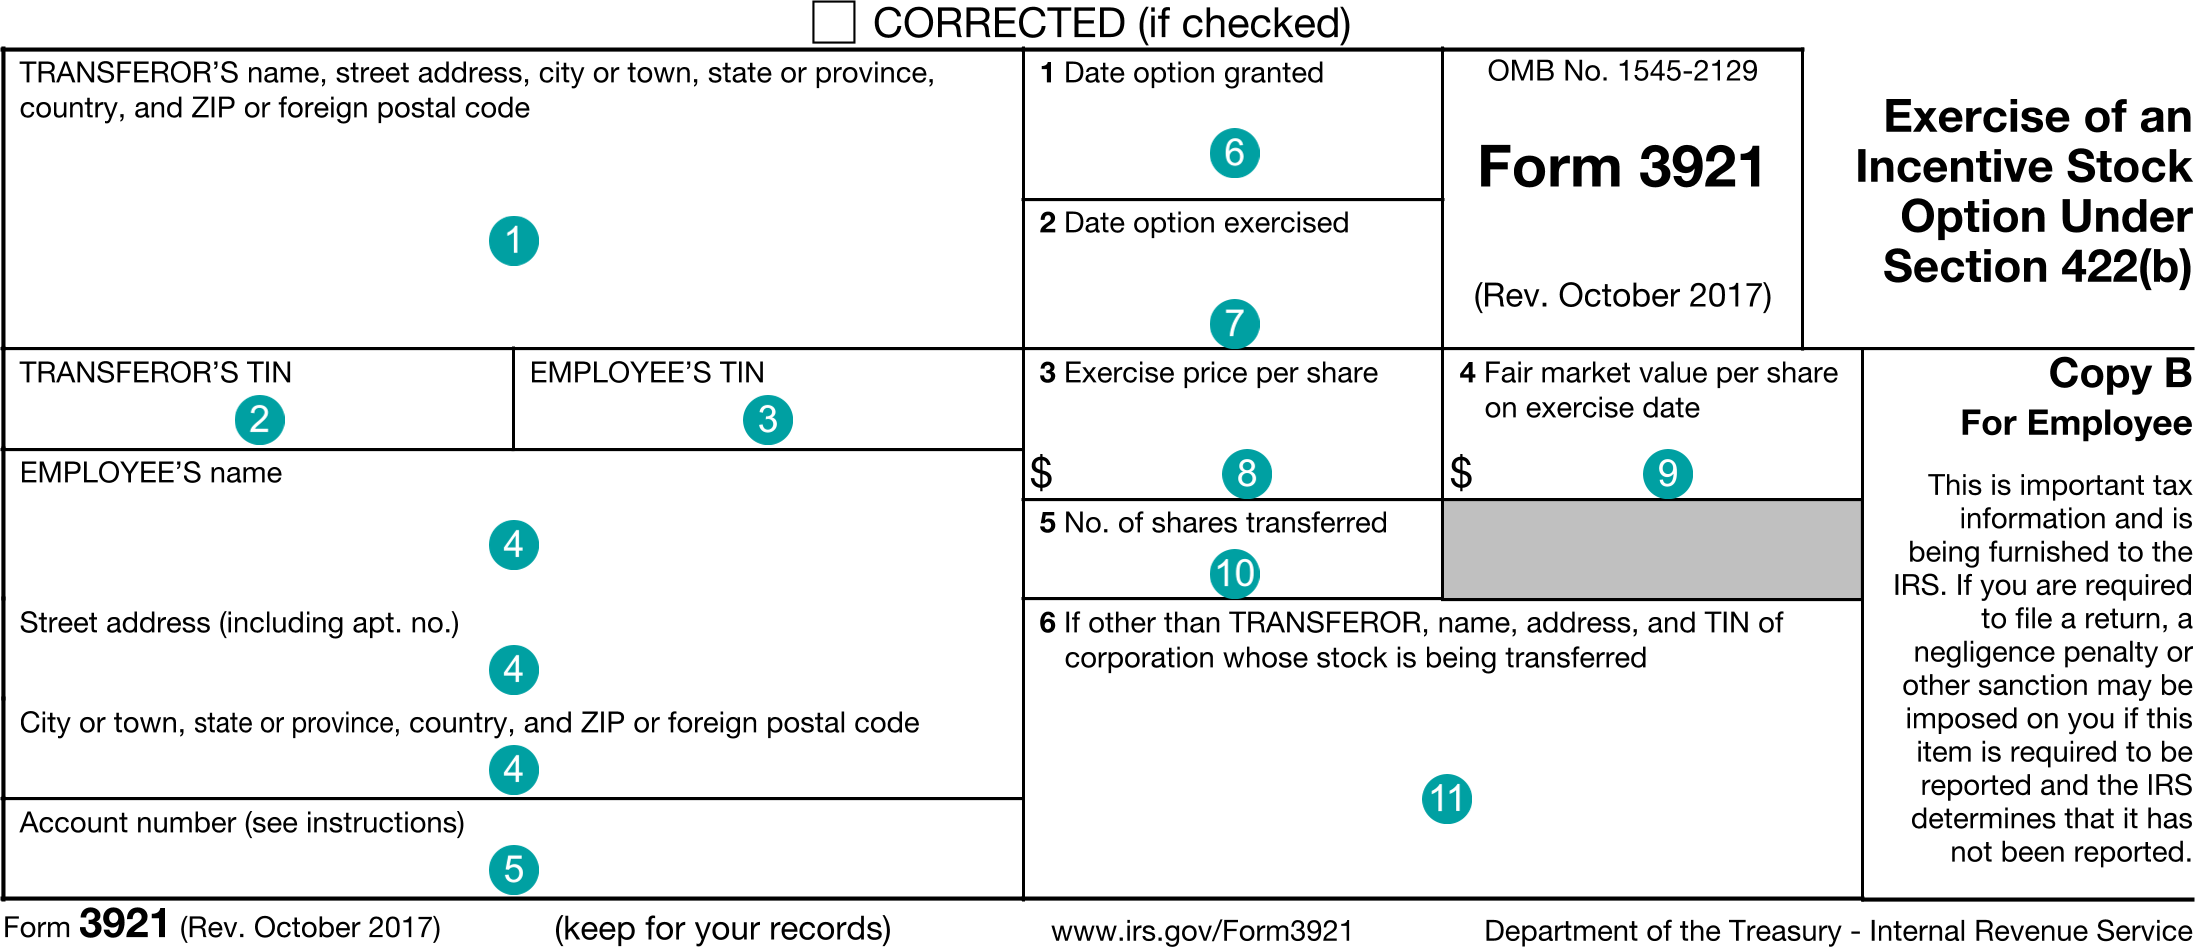 /img/forms/Tax3921/2022/v5.0/Tax3921.Recipient.Form.annotated.fdx.png